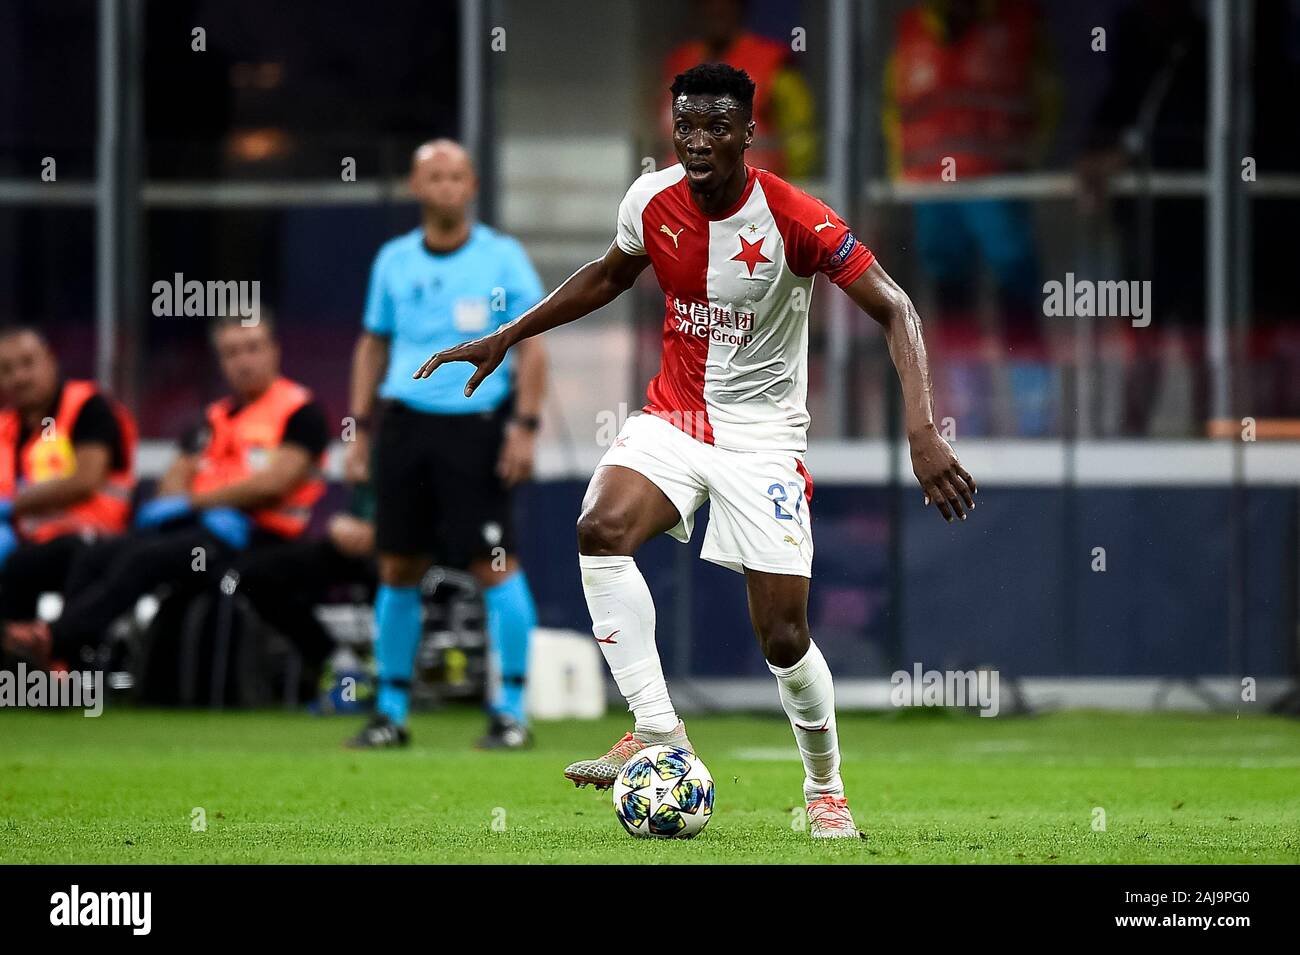 Milan, Italy. 17 September, 2019: Ibrahim Traore of SK Slavia Praha in  action during the UEFA Champions League football match between FC  Internazionale and SK Slavia Praha. The match ended in a